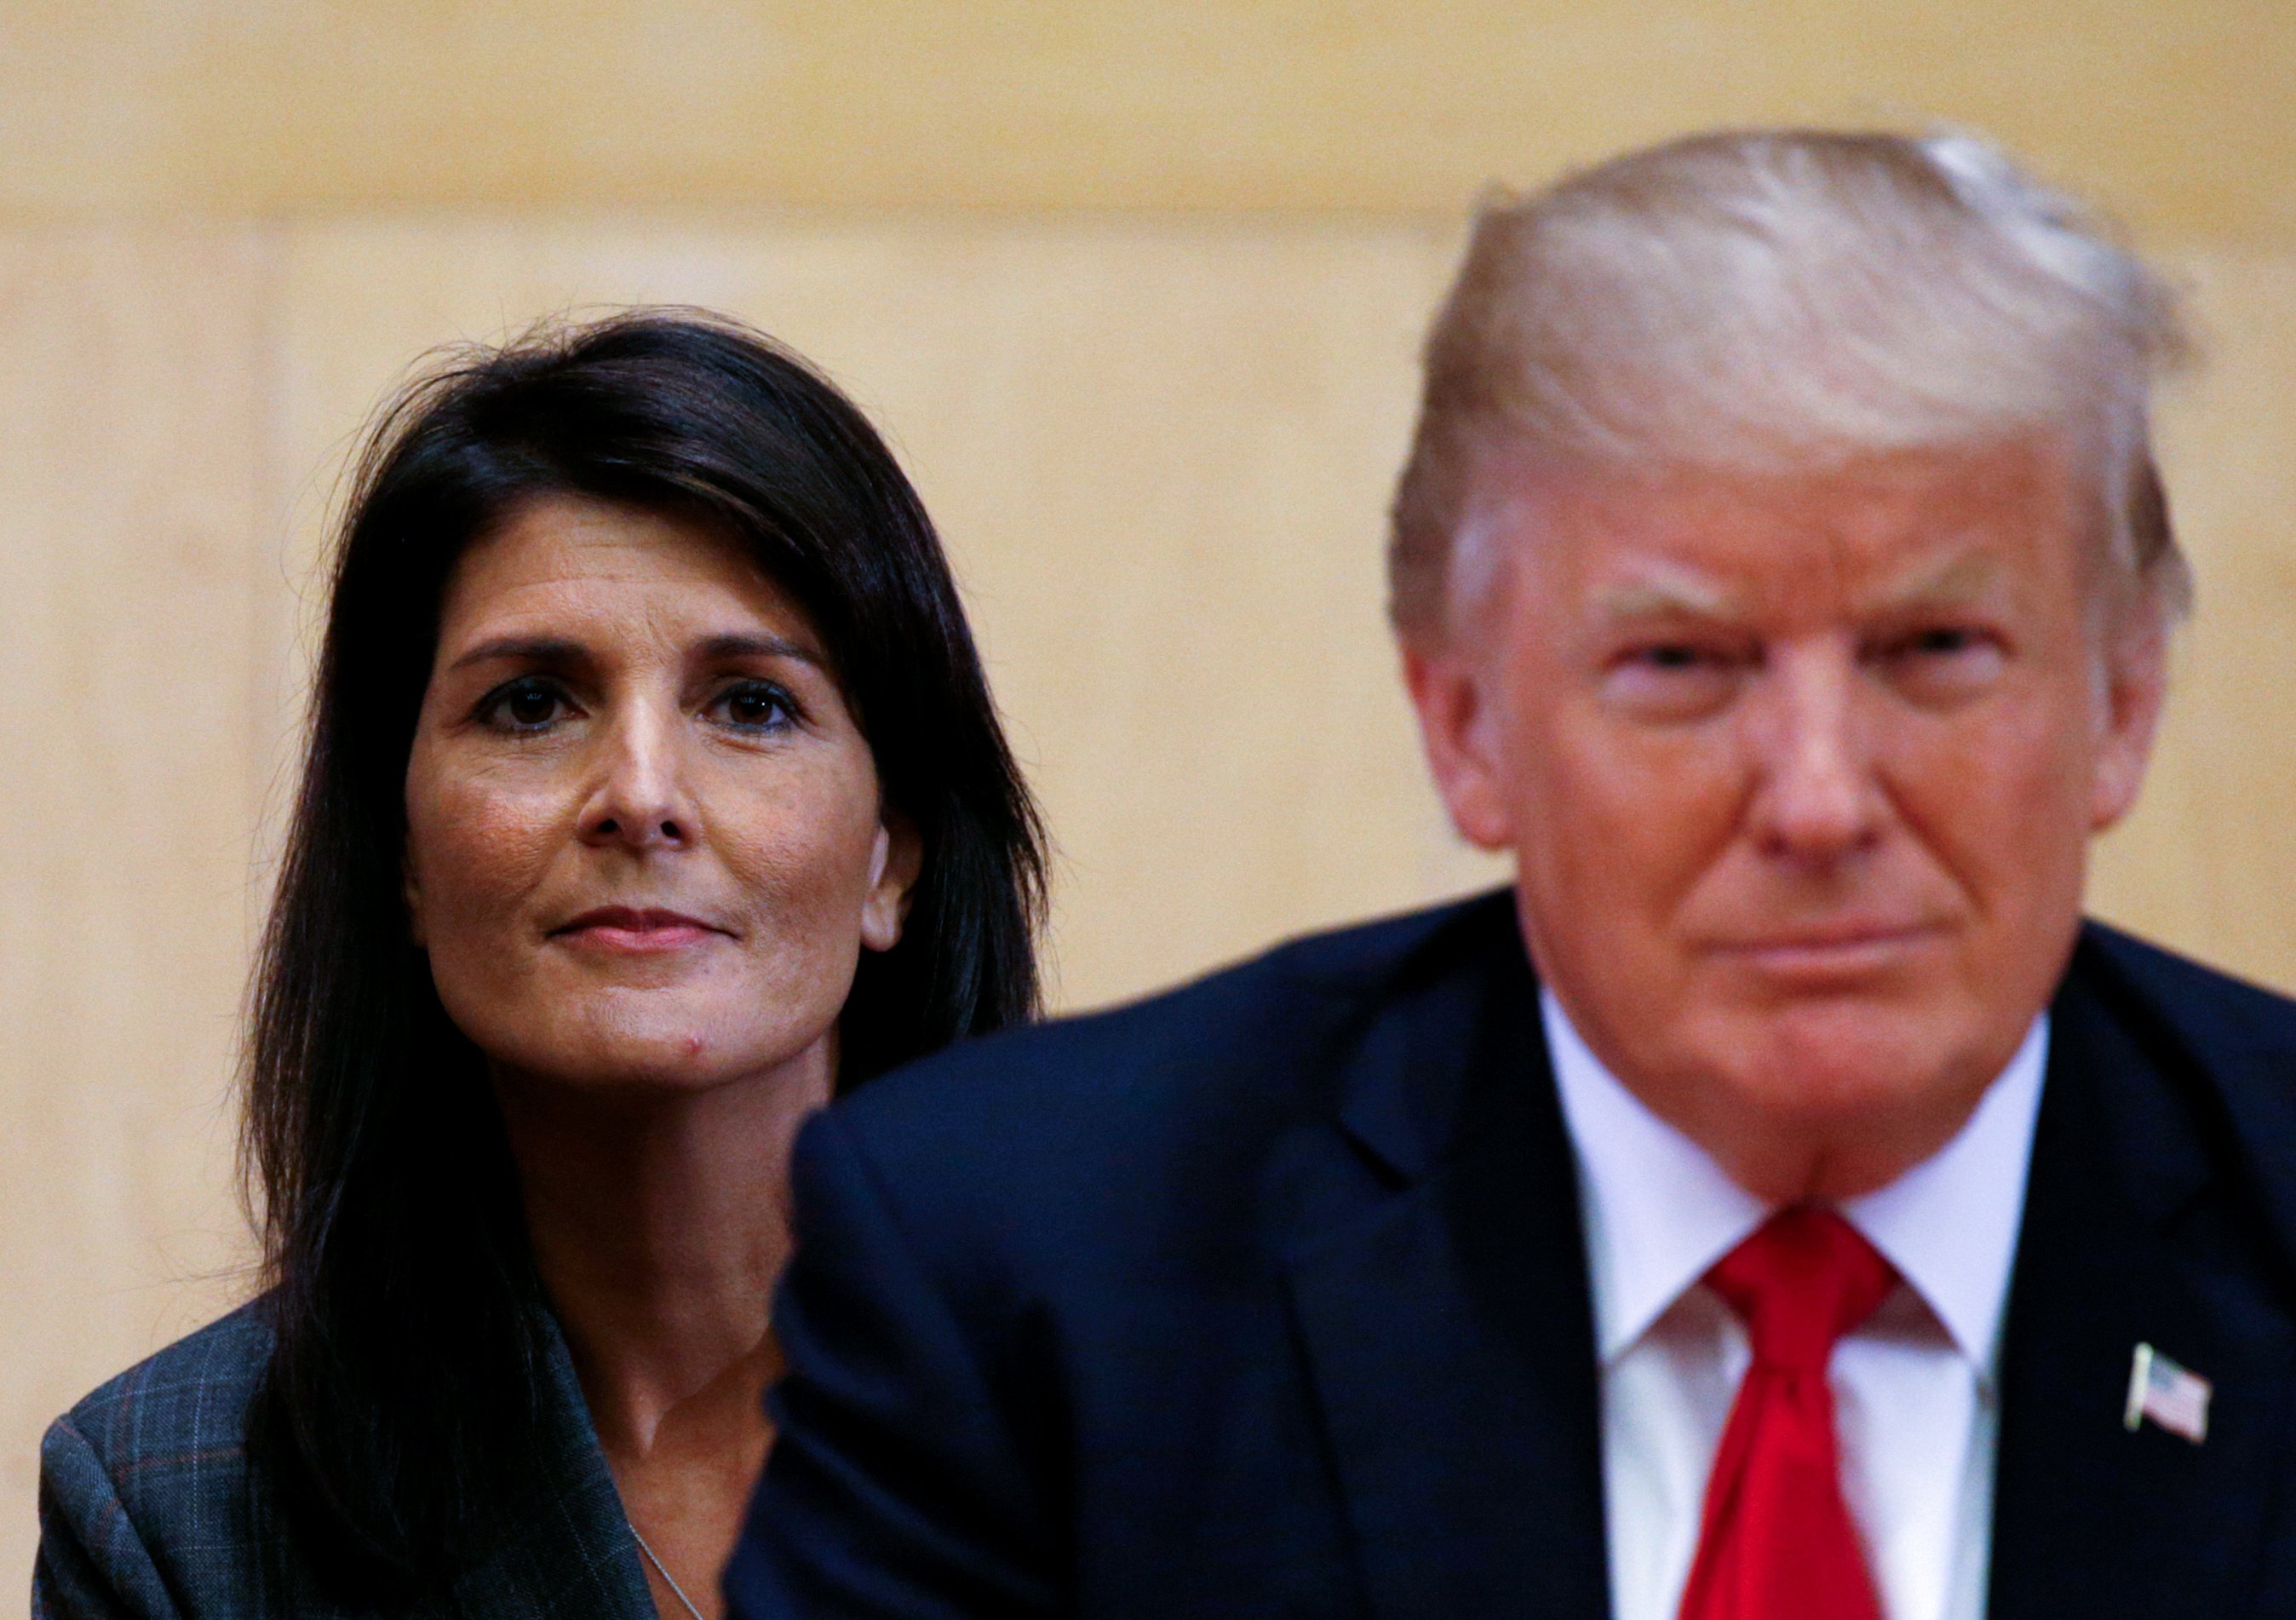 FILE PHOTO: U.S. Ambassador to the UN Nikki Haley (L) and U.S. President Donald Trump participate in a session on reforming the United Nations at UN Headquarters in New York, U.S., Sept.18, 2017. REUTERS/Kevin Lamarque/File Photo 